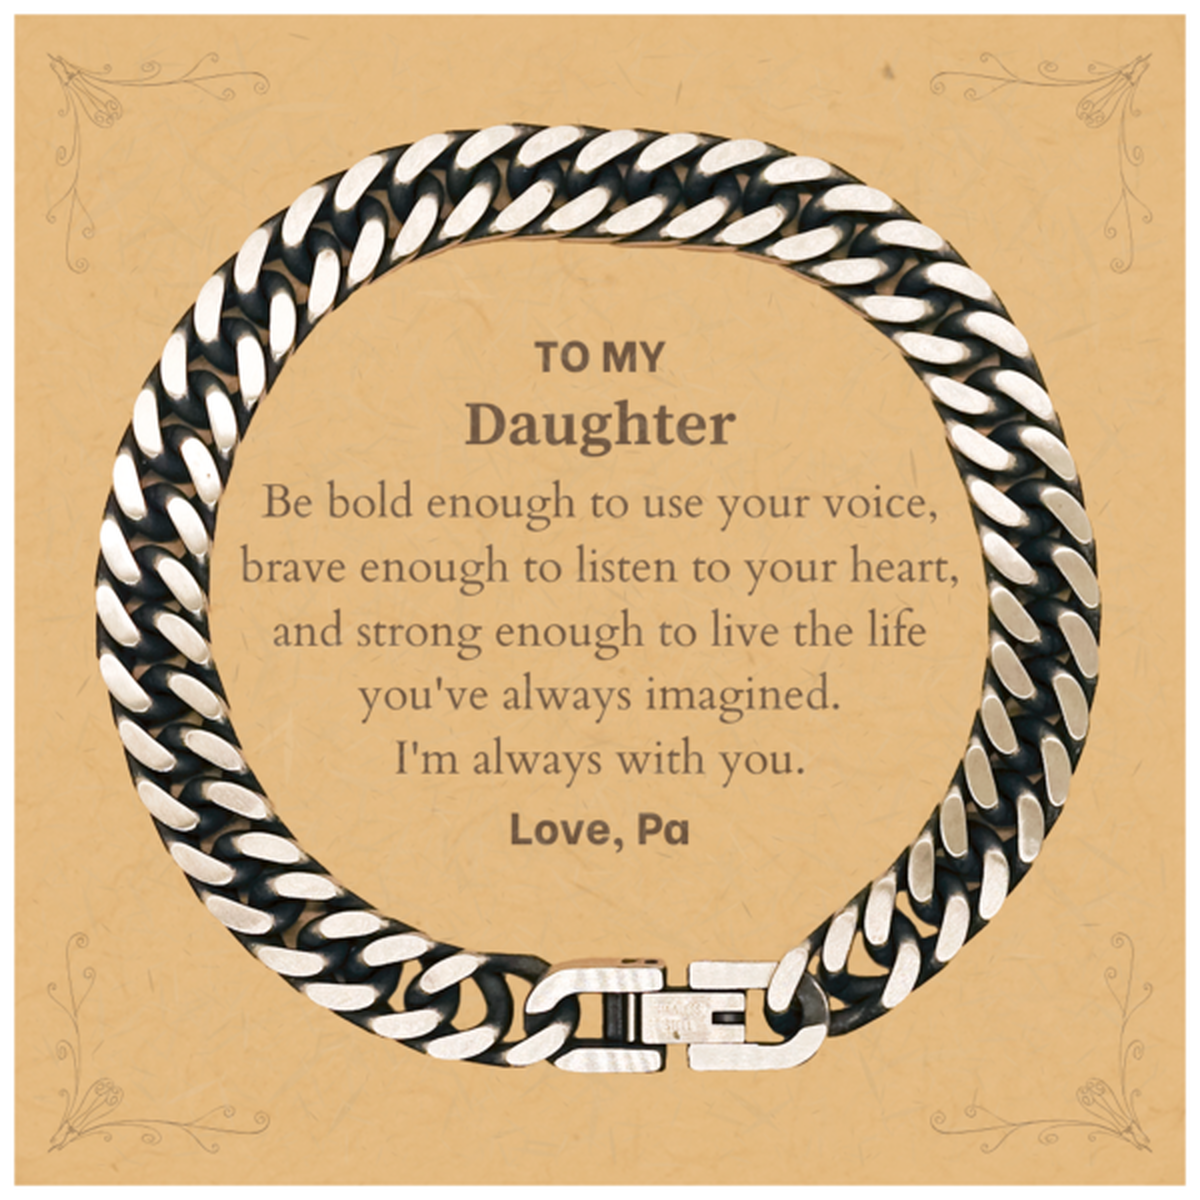 Keepsake Daughter Cuban Link Chain Bracelet Gift Idea Graduation Christmas Birthday Daughter from Pa, Daughter Be bold enough to use your voice, brave enough to listen to your heart. Love, Pa